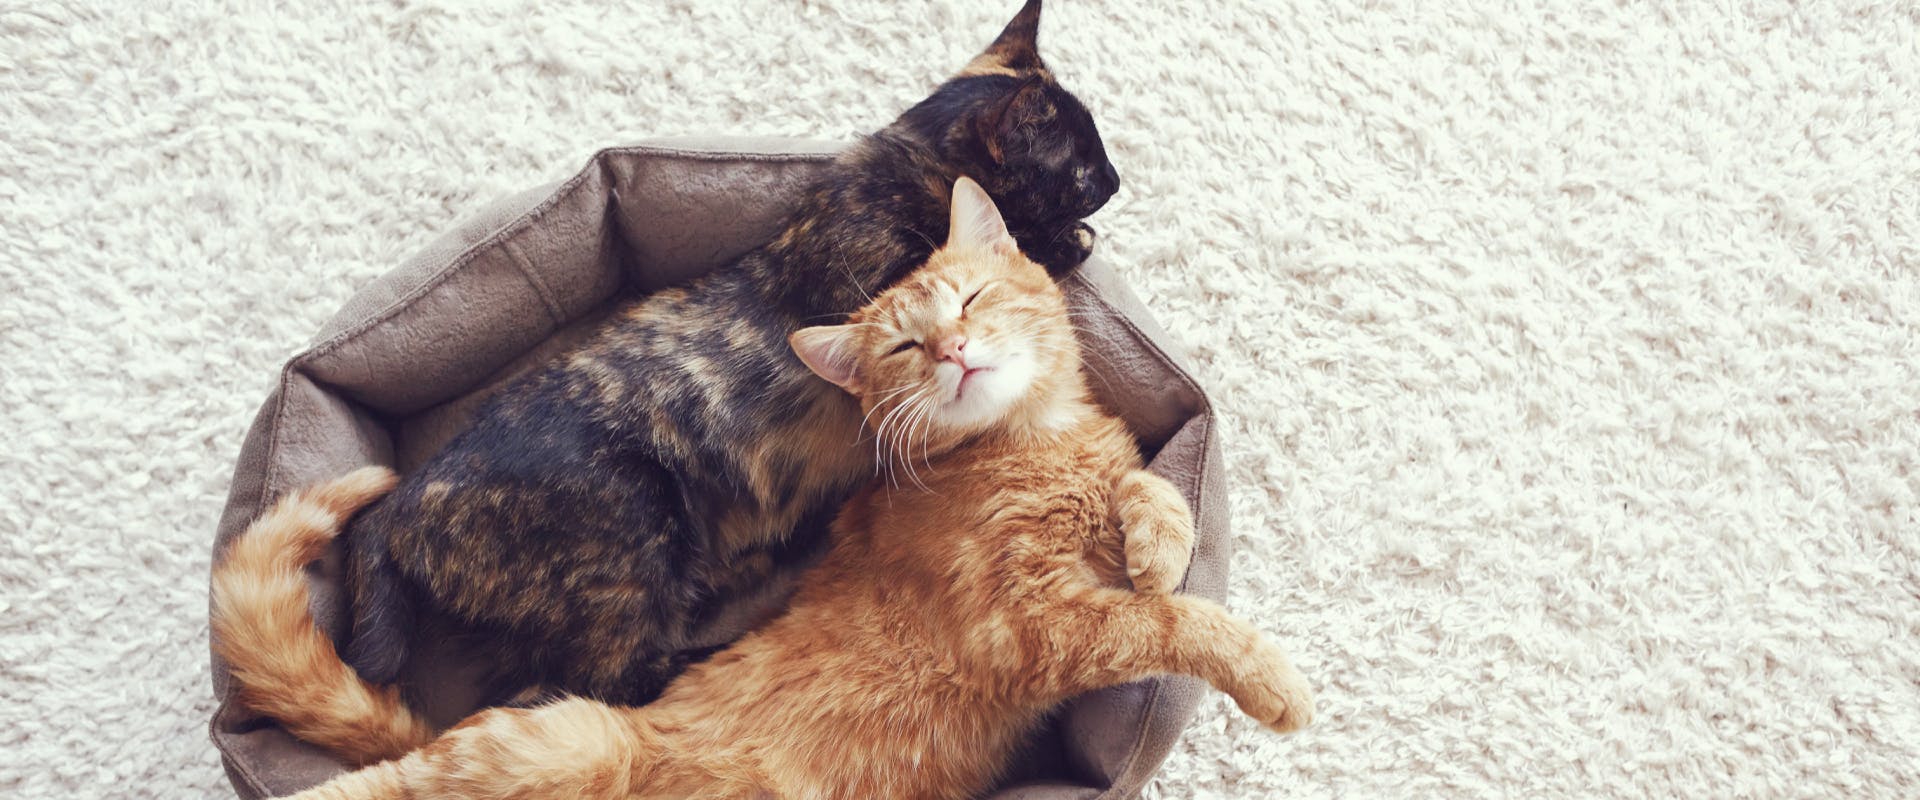 a tortoiseshell cat lying in a cat bed next to a ginger cat who is lying on its back in the cat bed